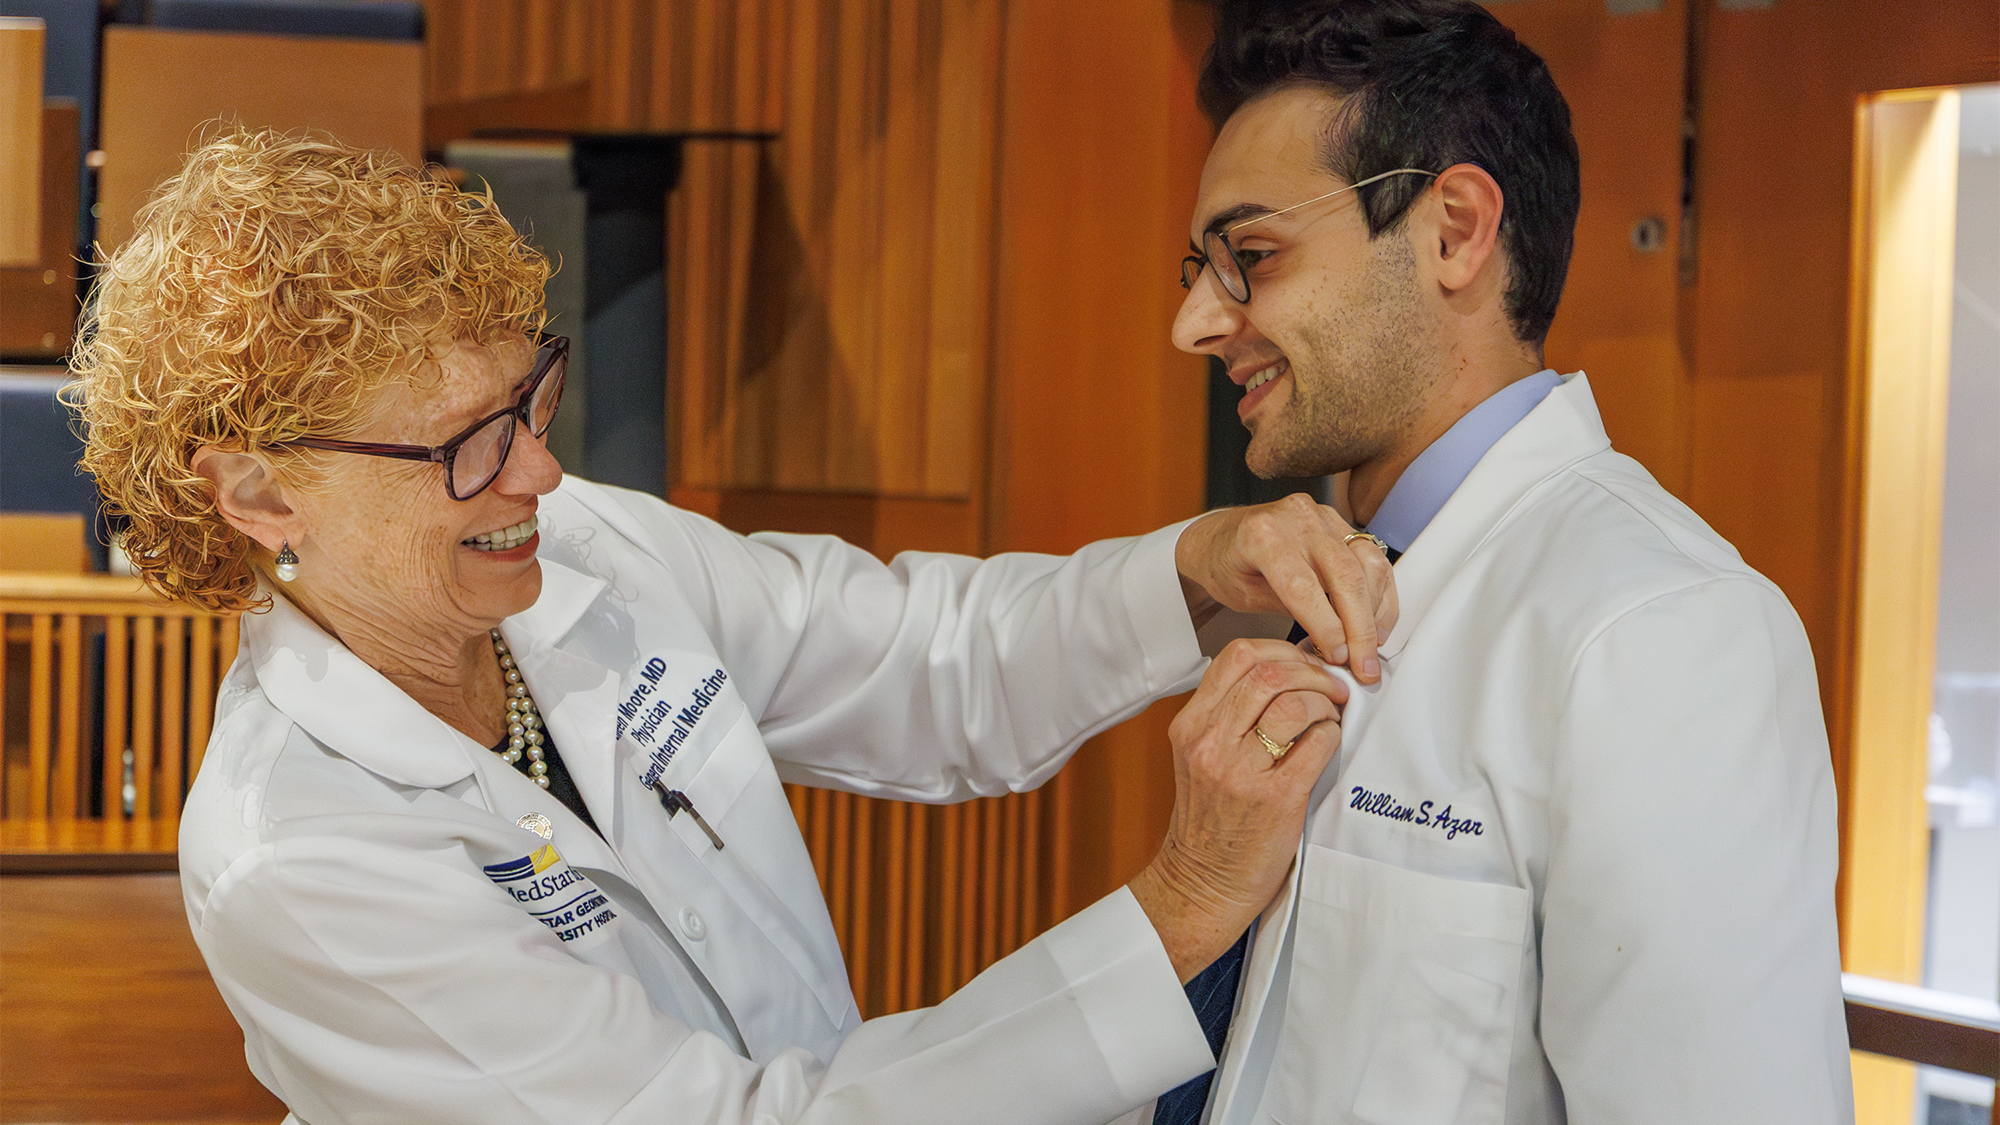 Dr. Moore pins an award onto the white coat of student William Azar